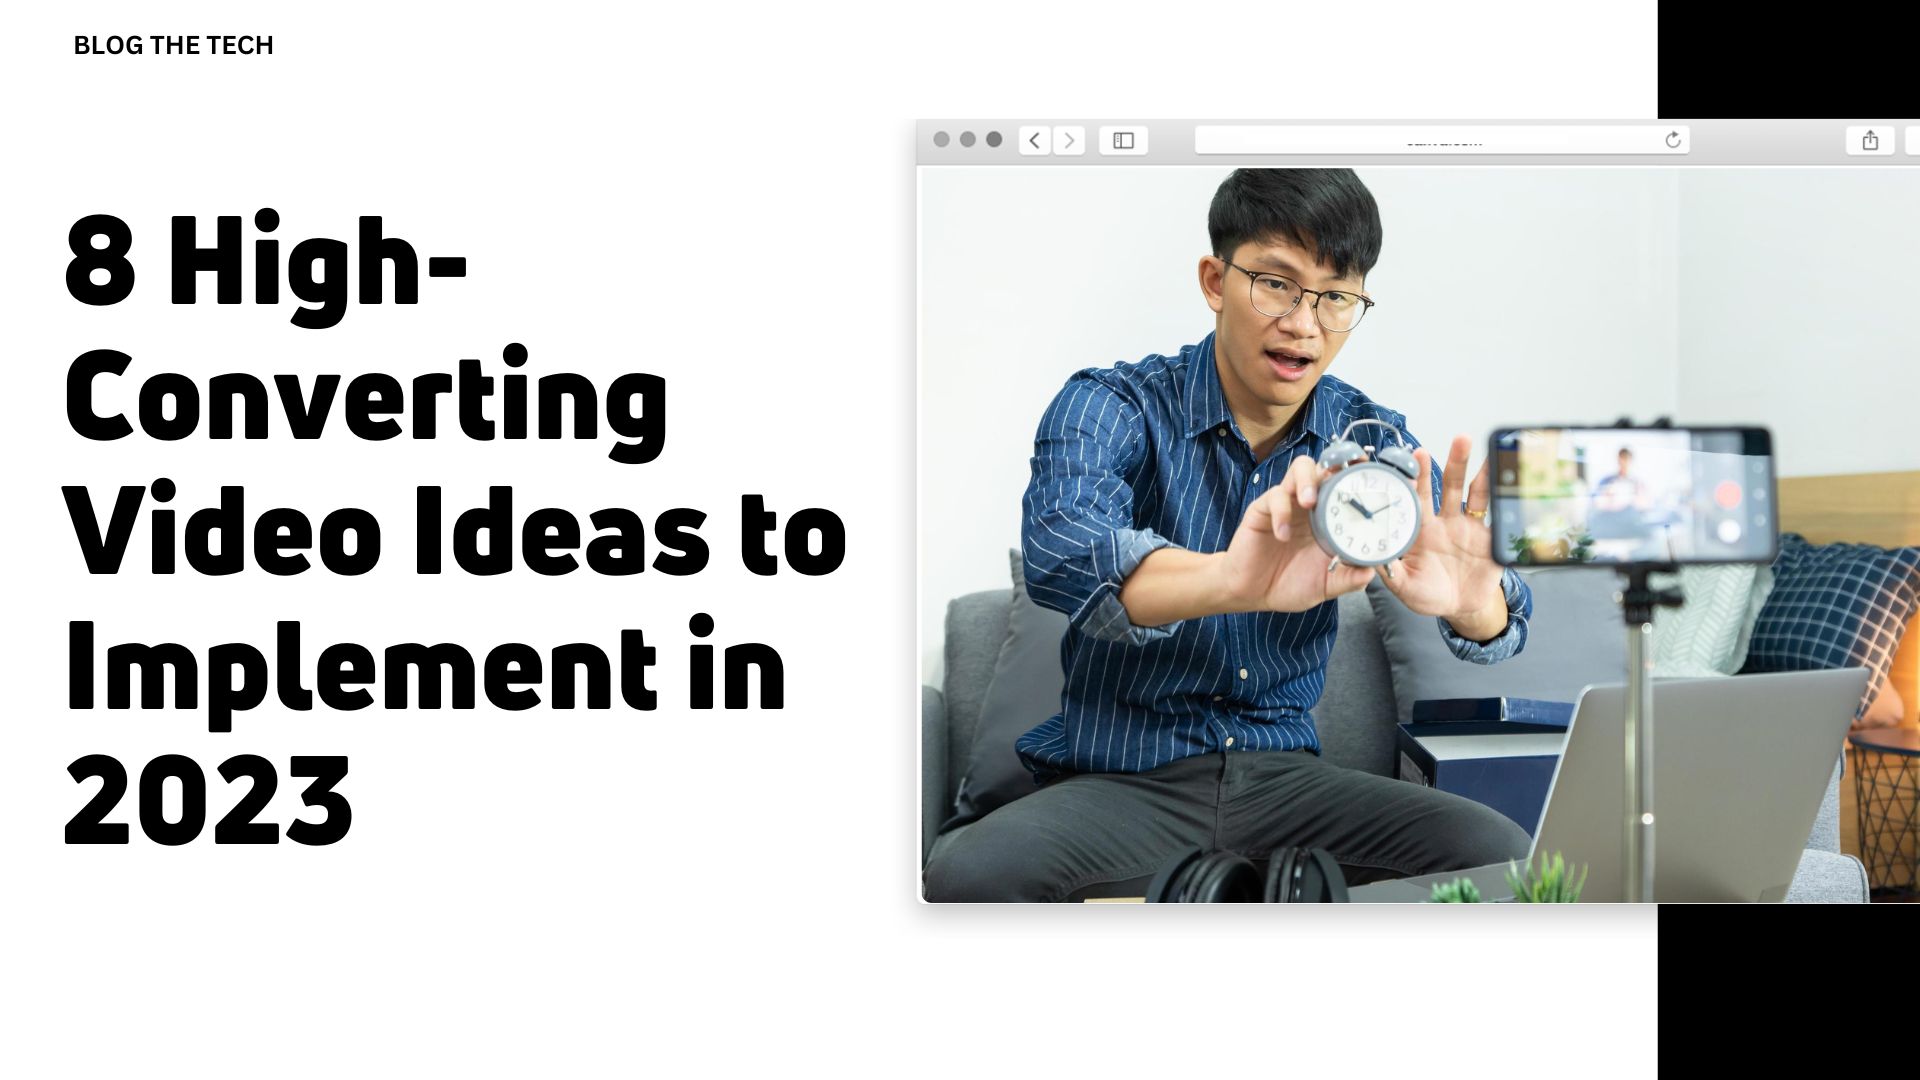 8 High Converting Video Ideas to Implement in 2023